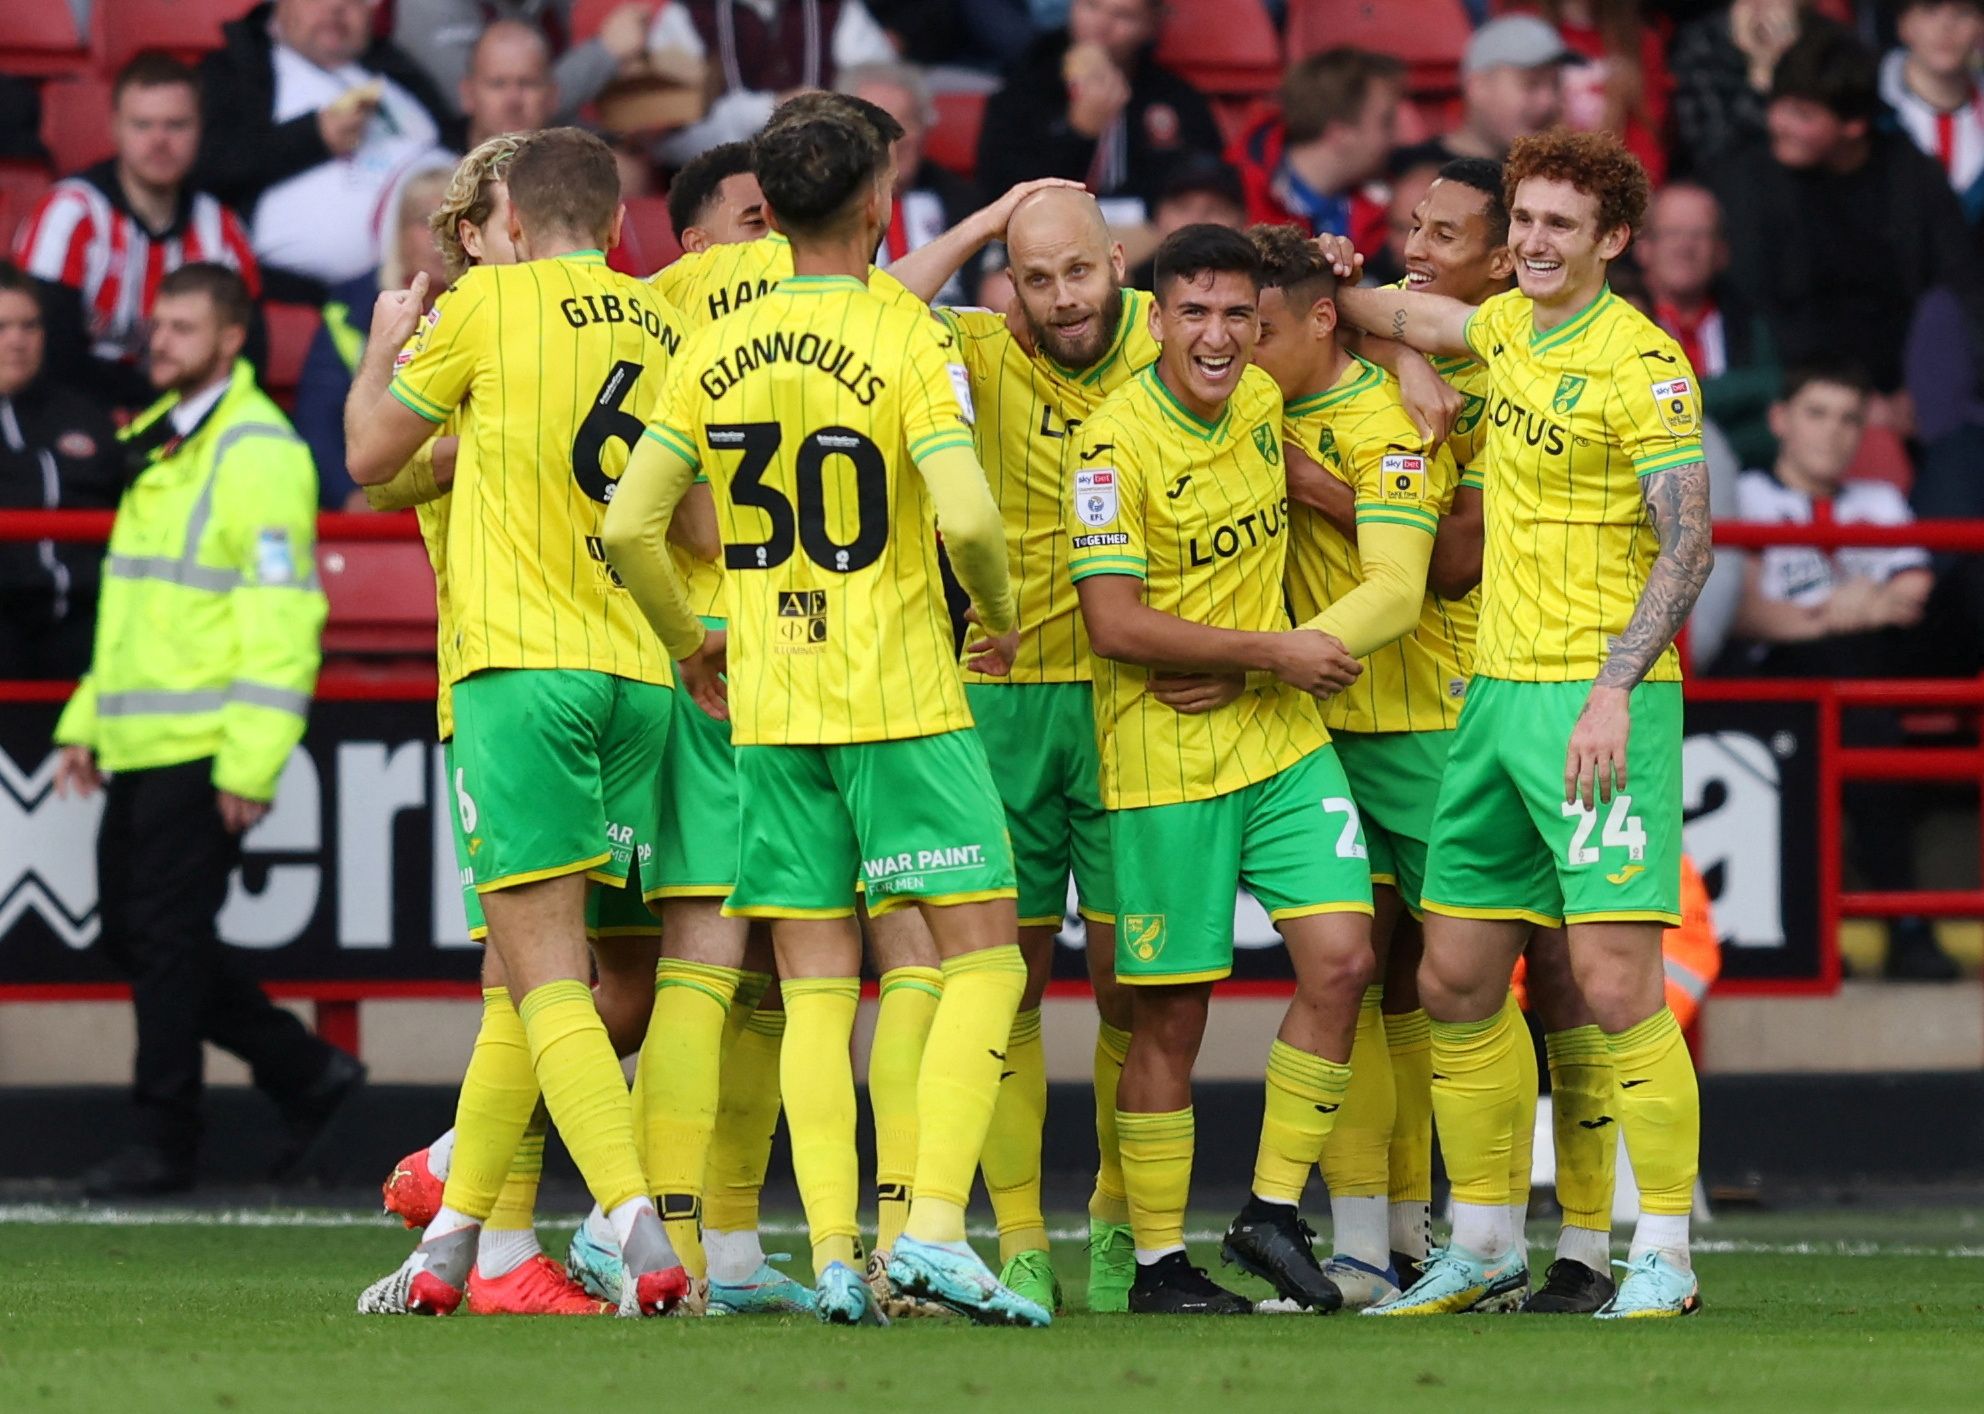 Soccer Football - Championship - Sheffield United v Norwich City - Bramall Lane, Sheffield, Britain - October 22, 2022 Norwich City's Teemu Pukki celebrates scoring their second goal with teammates Action Images/John Clifton  EDITORIAL USE ONLY. No use with unauthorized audio, video, data, fixture lists, club/league logos or 